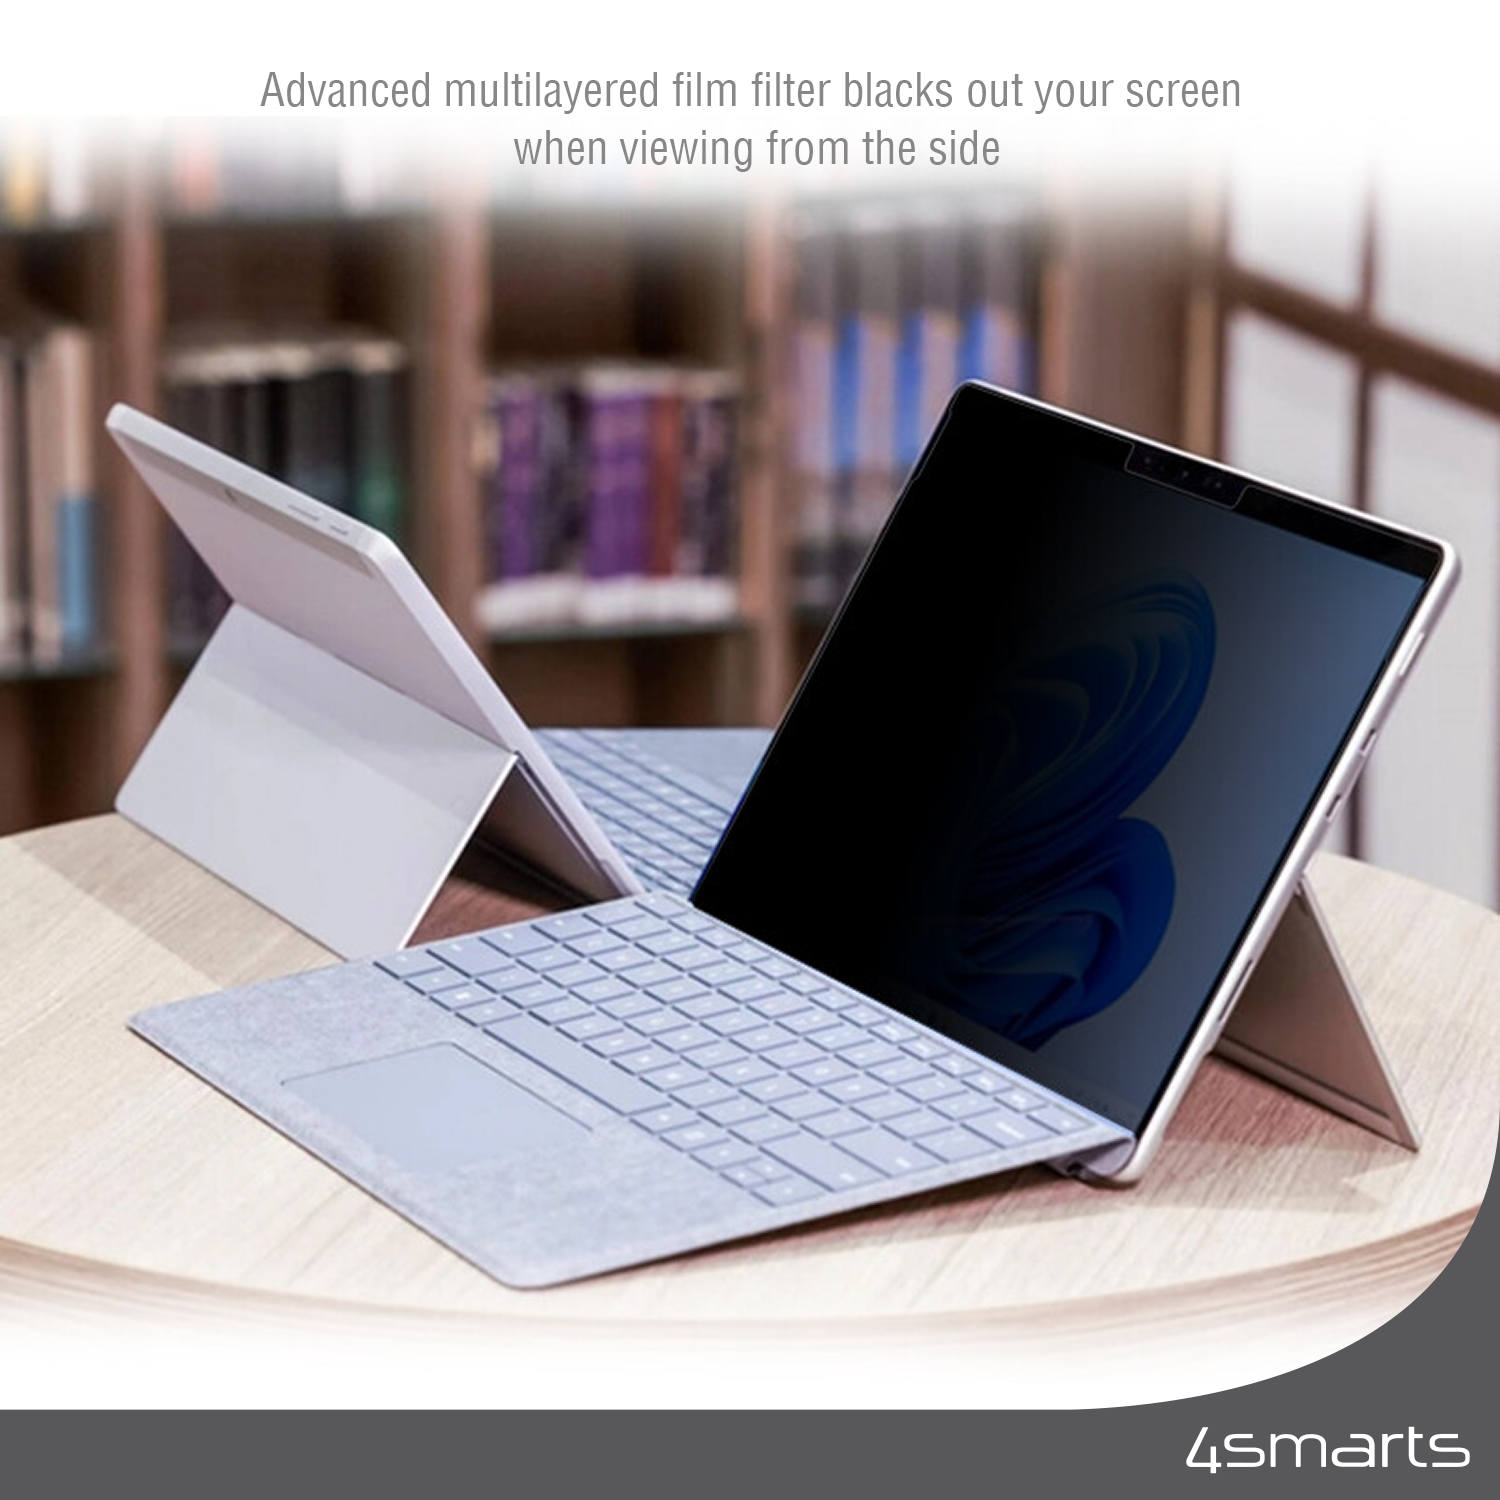 With our 4smarts Smartprotect privacy screen protector for Surface Laptop 4 13.5-inch only you see what’s on your tablet screen.